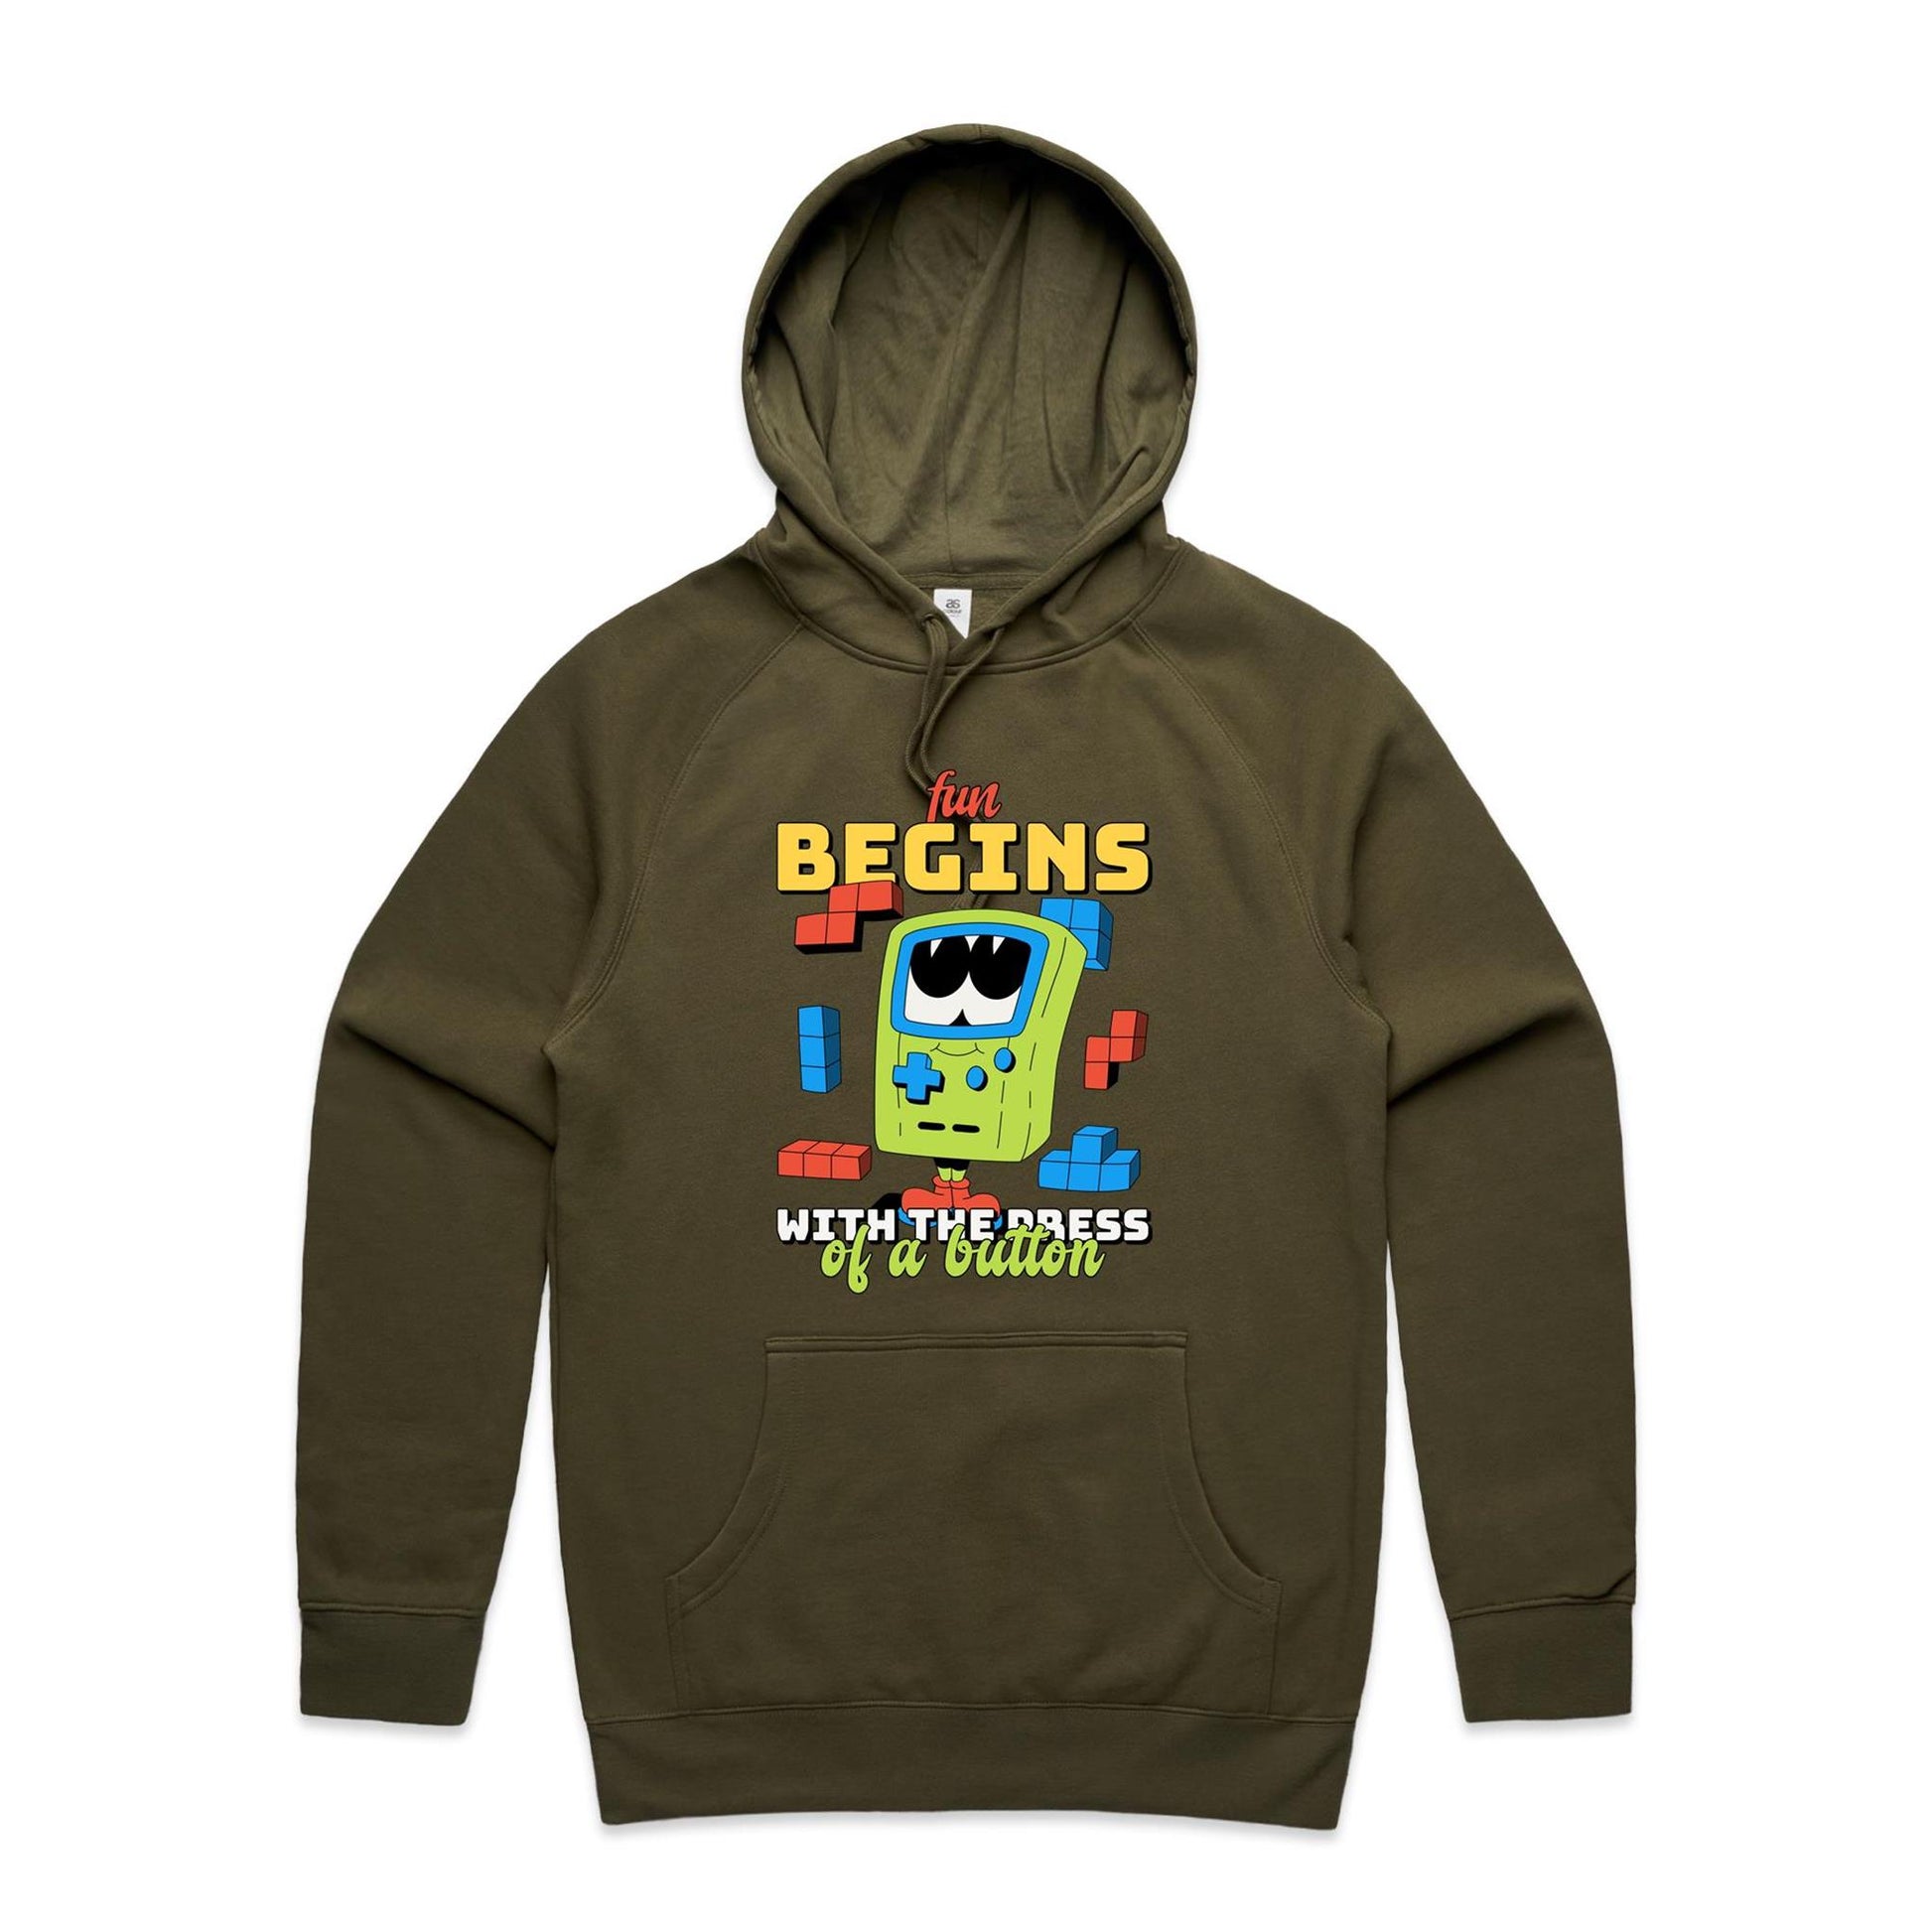 Fun Begins With The Press Of A Button - Supply Hood Army Mens Supply Hoodie Games